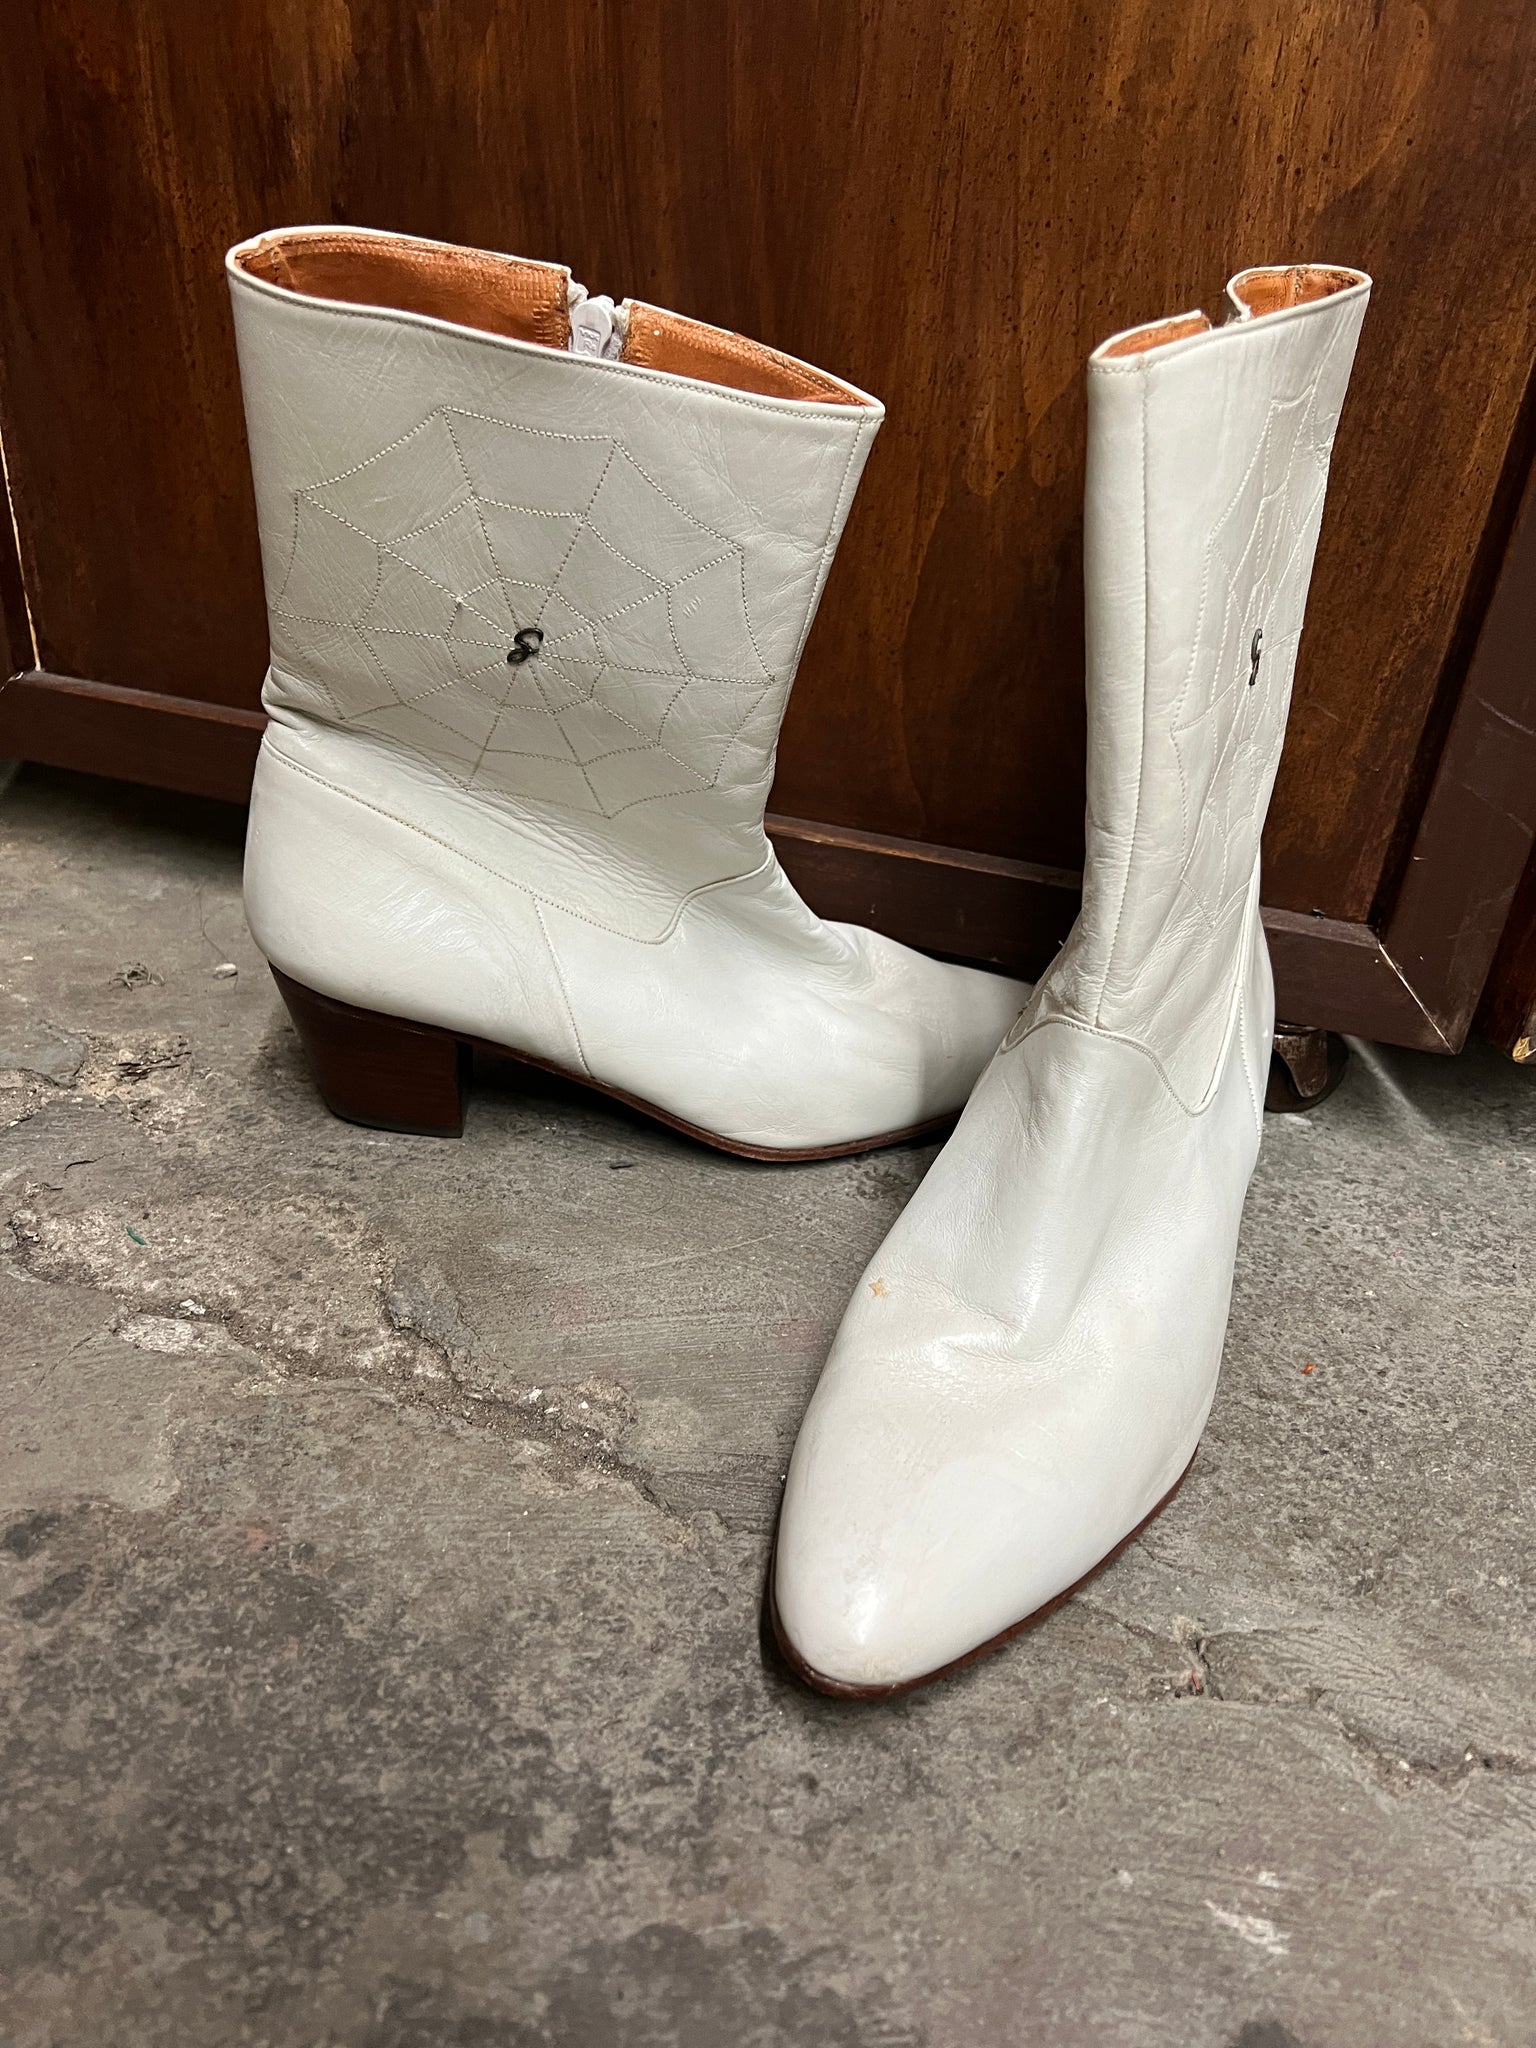 RENTAL 1980s Mens White Boots w/spider web detail  REPLACE $475